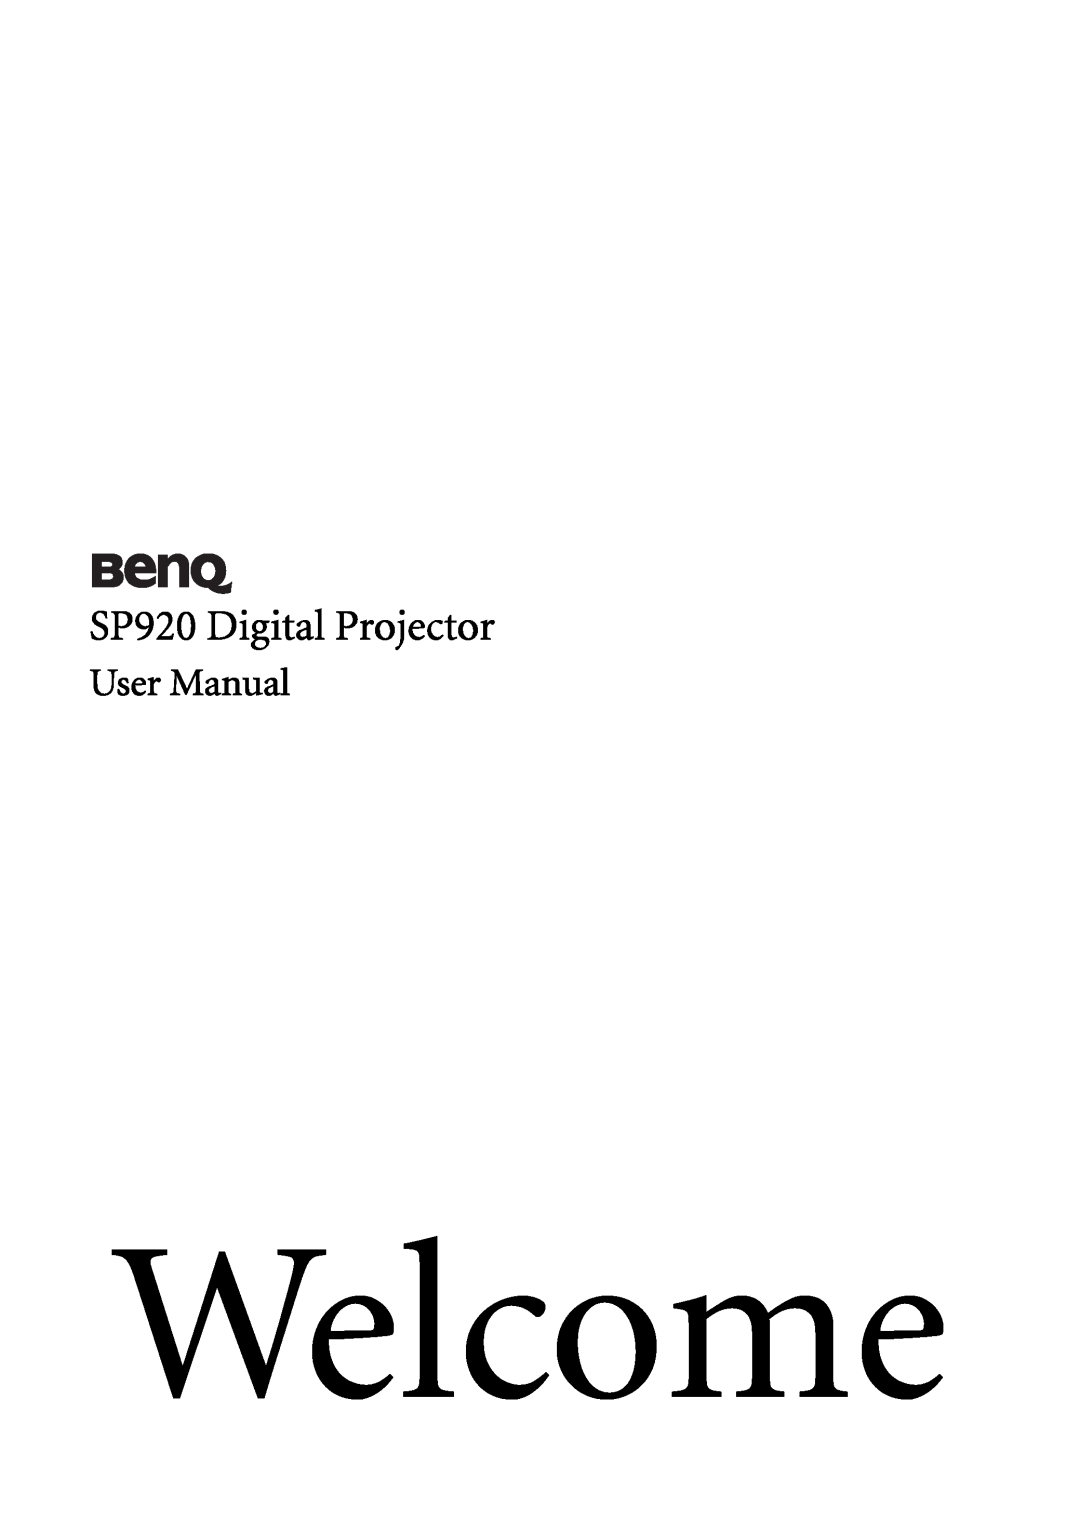 BenQ manual Connection, Pin assignment, Interface Setting, BenQ RS232 Code, Model SP920 